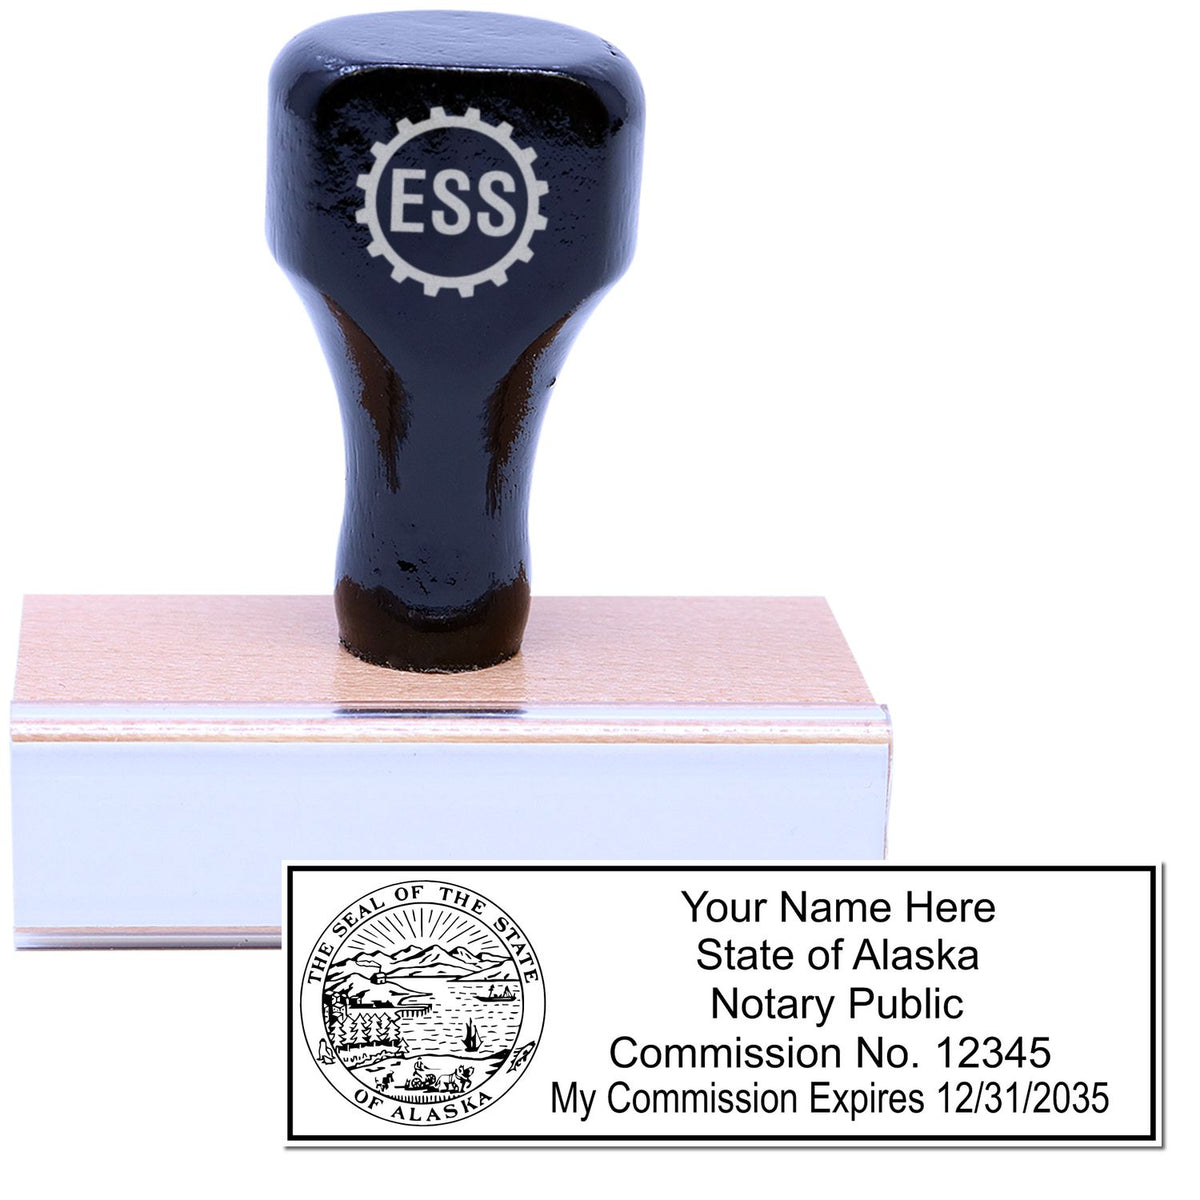 The main image for the Wooden Handle Alaska State Seal Notary Public Stamp depicting a sample of the imprint and electronic files